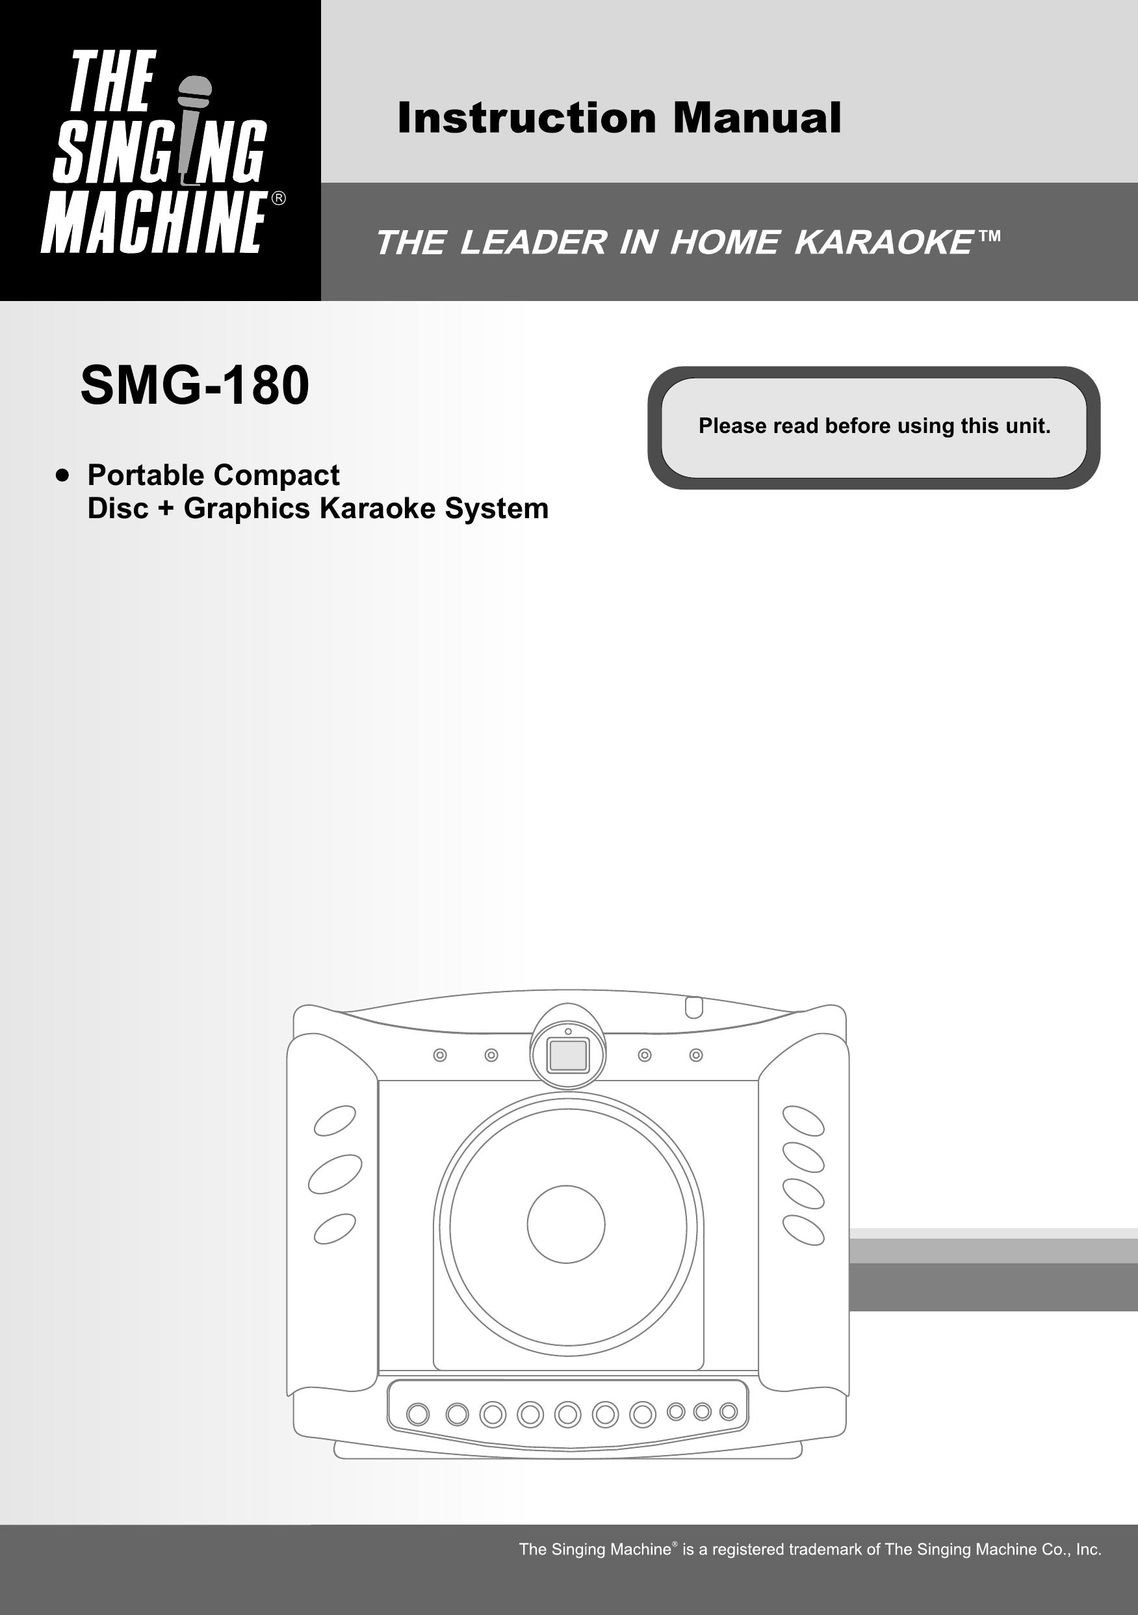 The Singing Machine SMG-180 CD Player User Manual